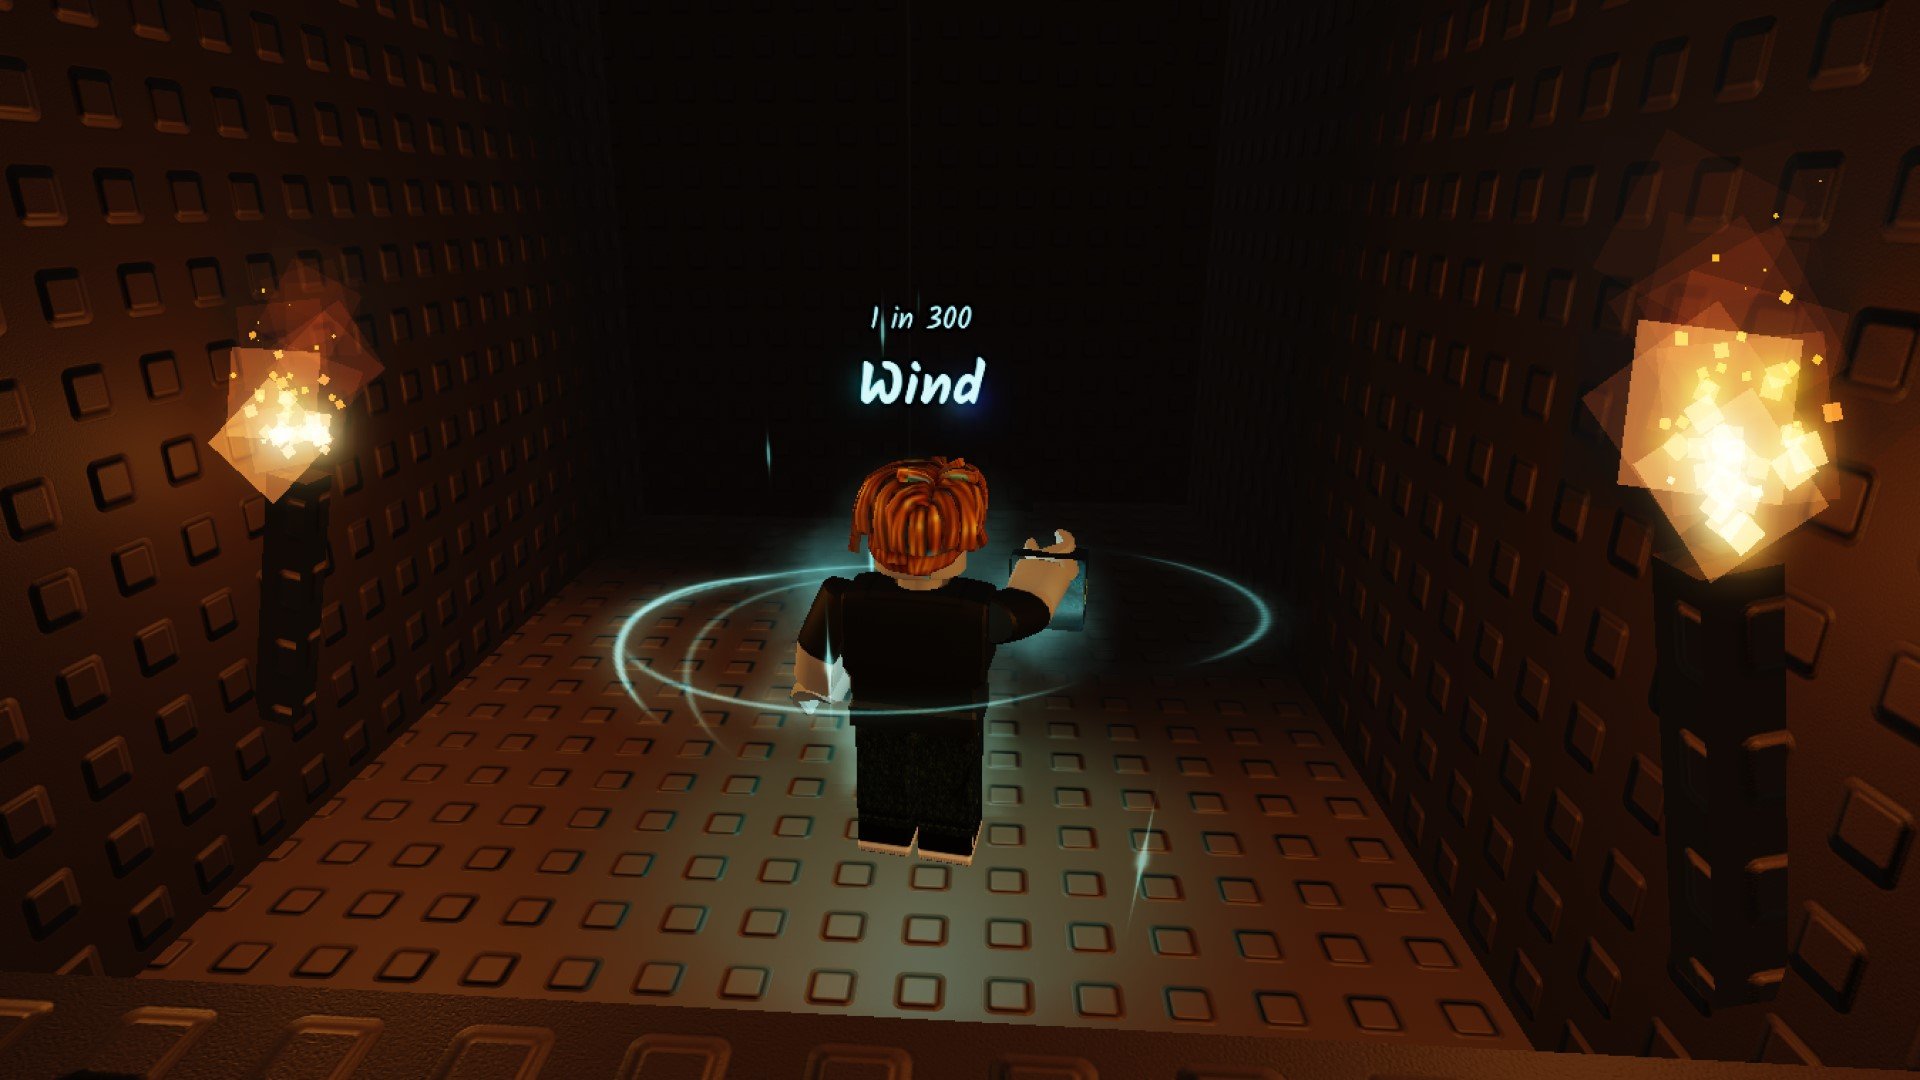 A character from Roblox game Sols RNG standing in a dark mineshaft. Two flaming torches sit on either side of the scene.